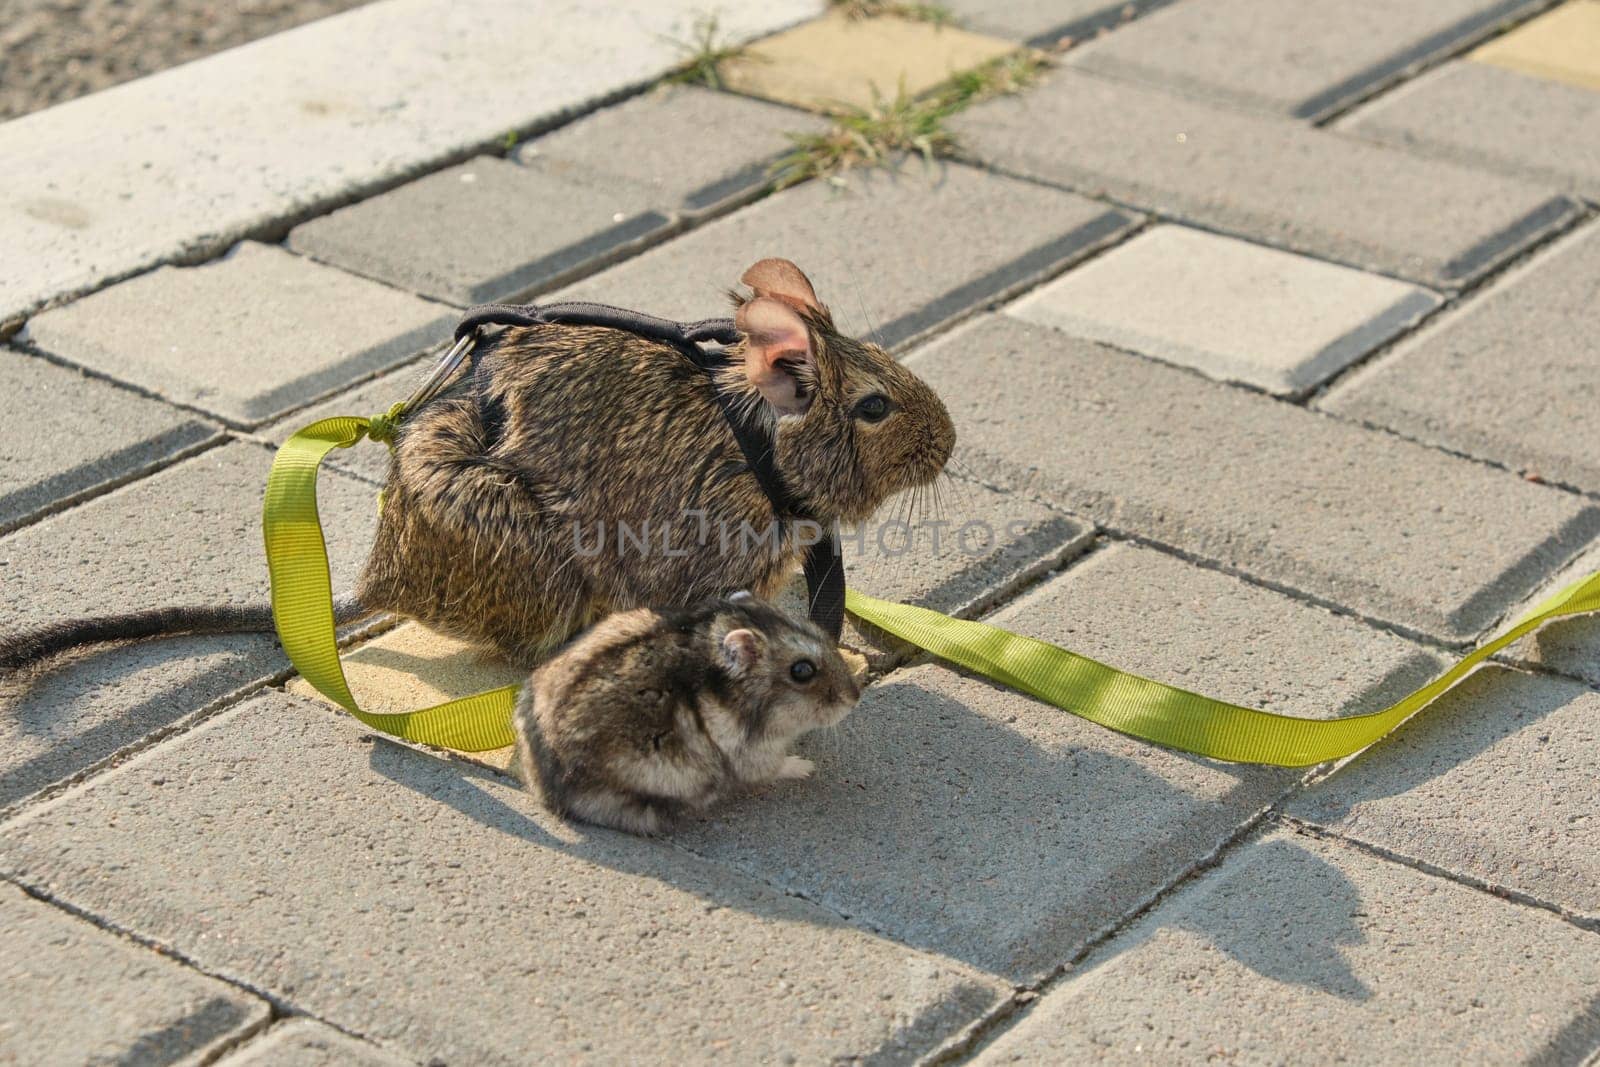 Funny photo, two rodents Chilean degu squirrel and hamster sitting on sidewalk and looking forward